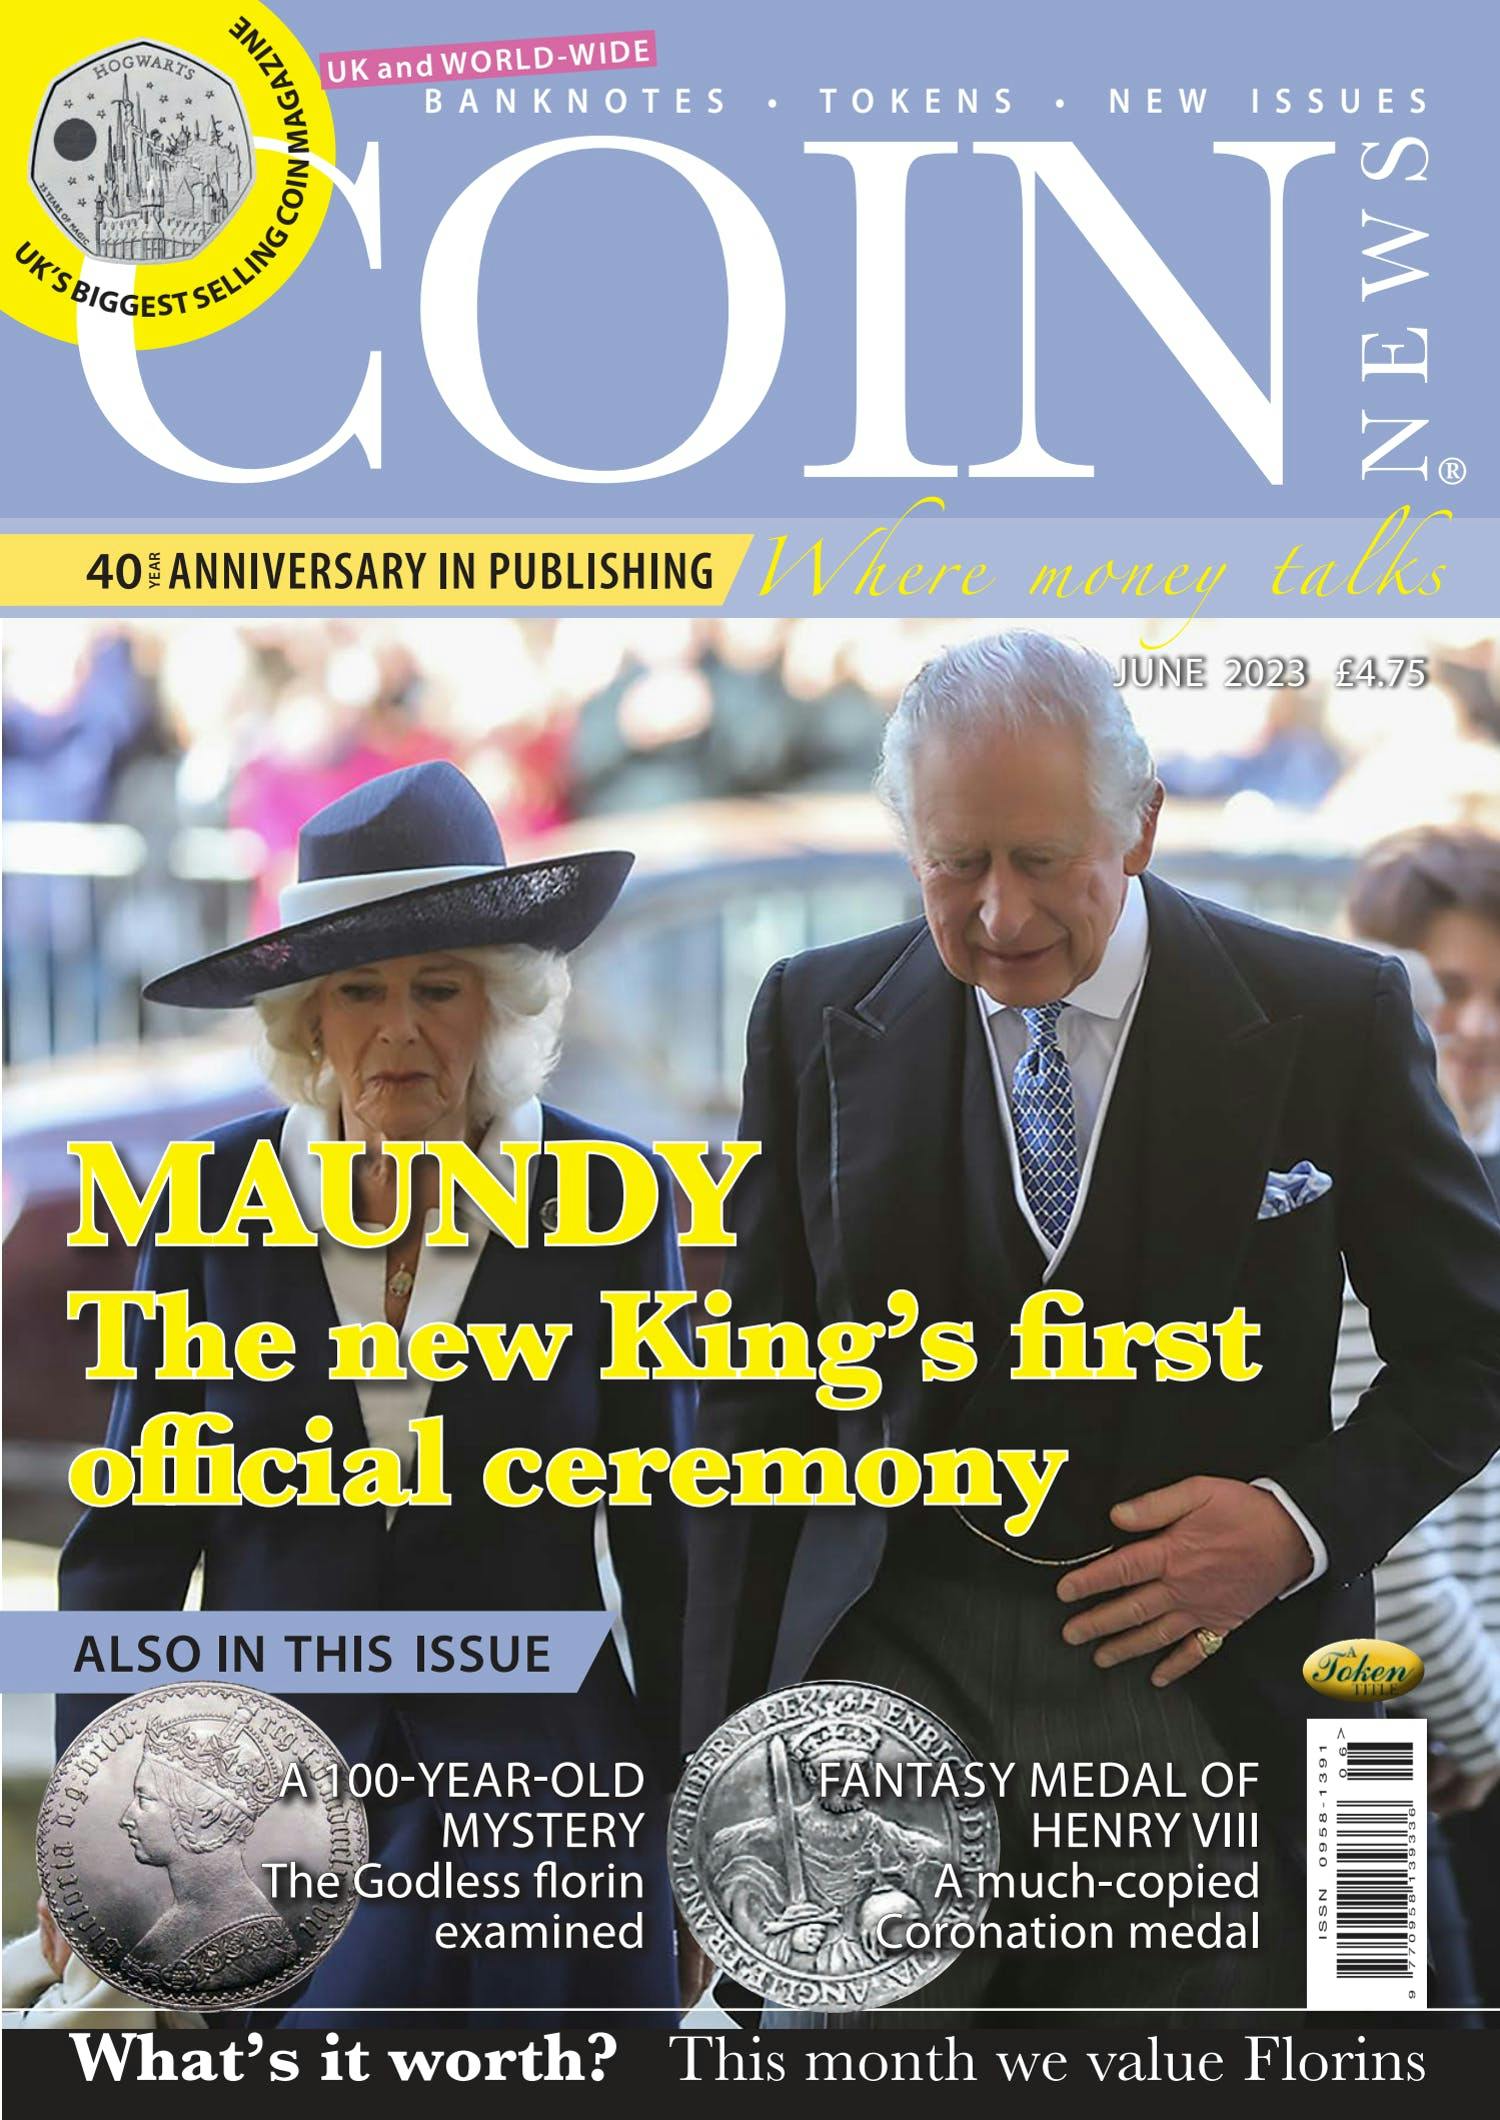 The front cover of Coin News, June 2023 - Volume 60, Number 6